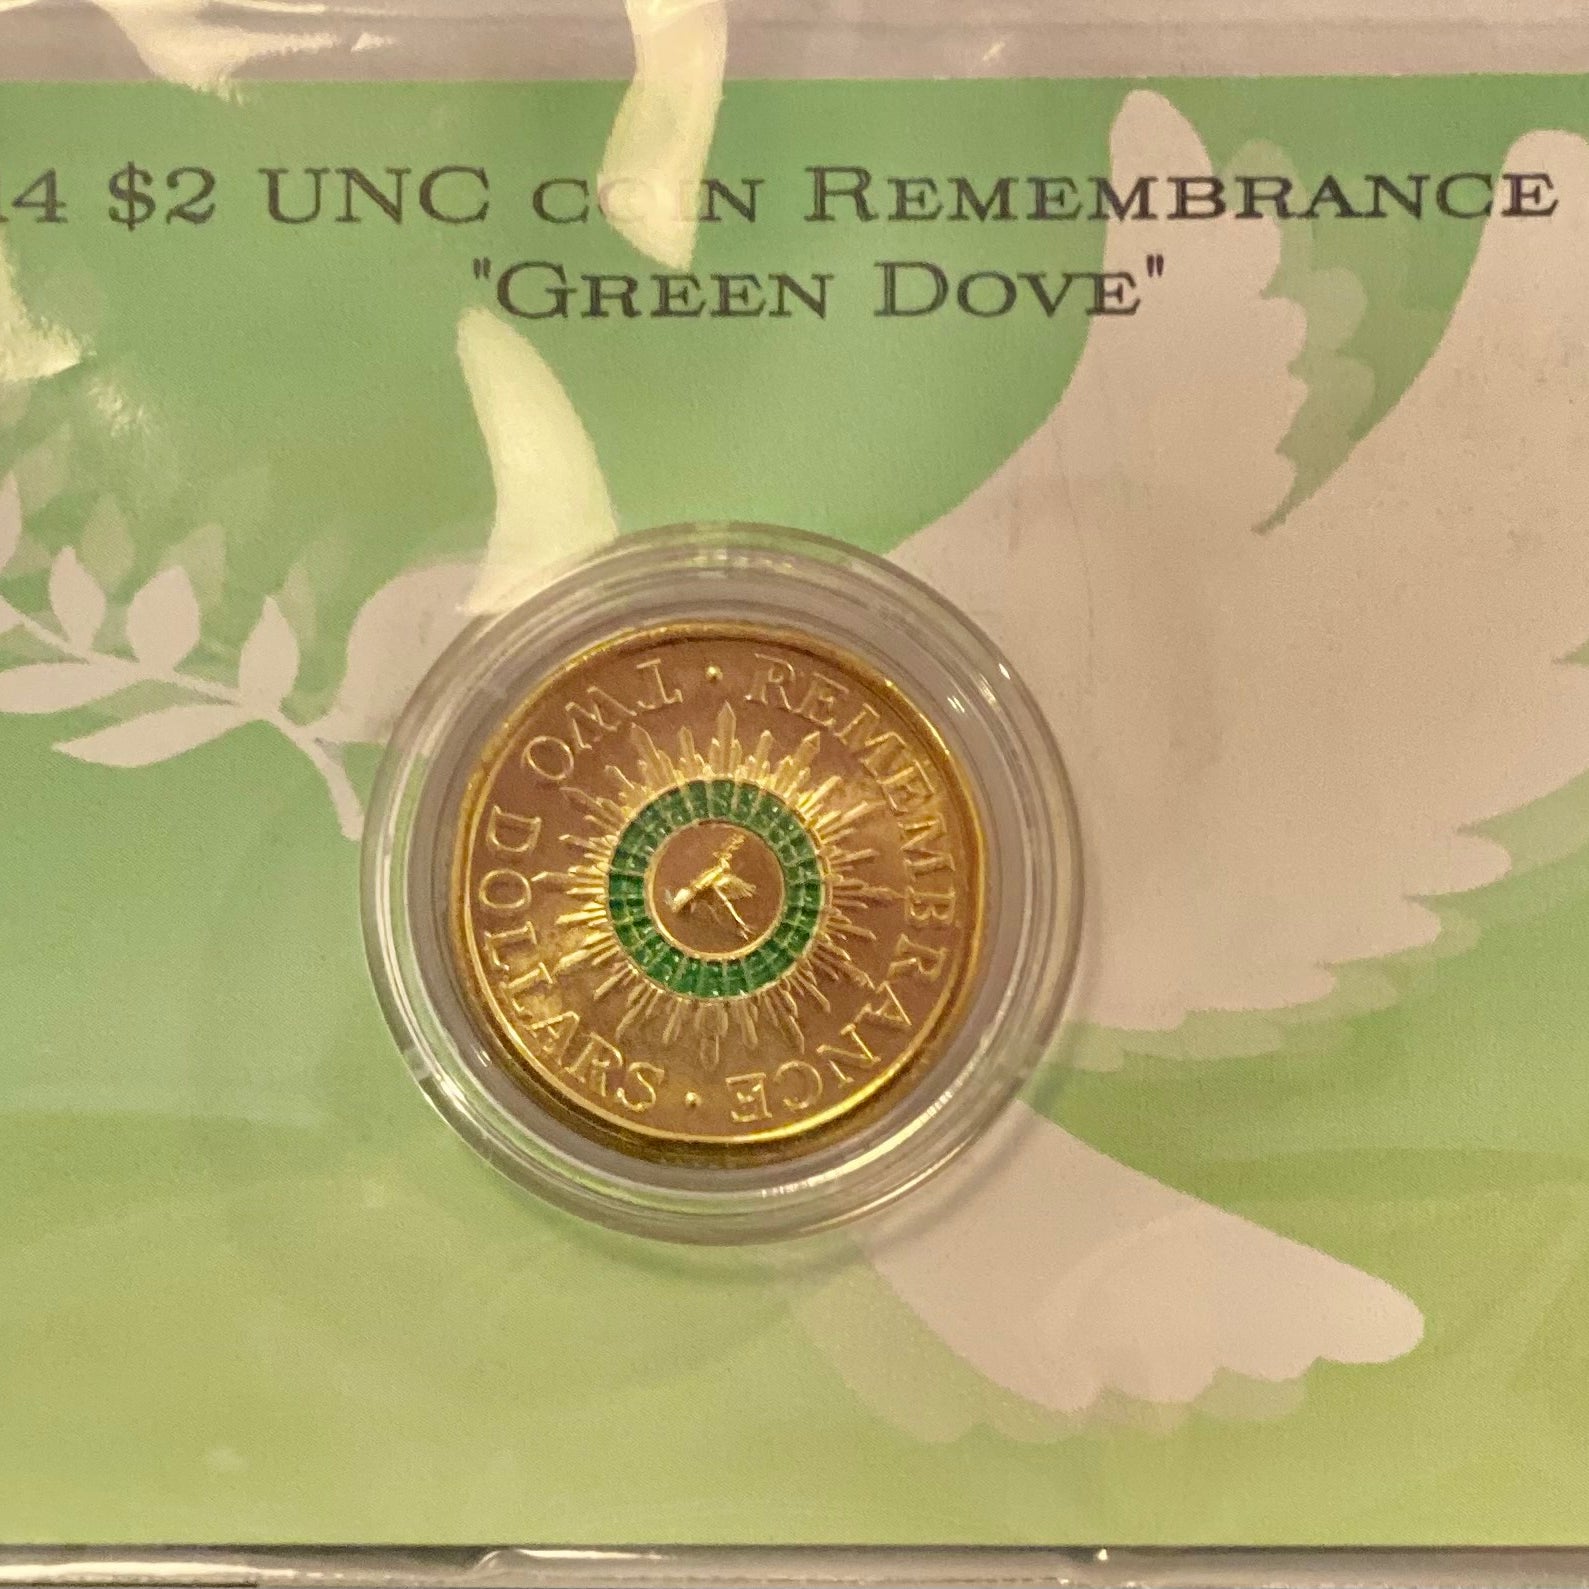 2014 Remembrance Day Green Dove Coloured UNC Coin in Card